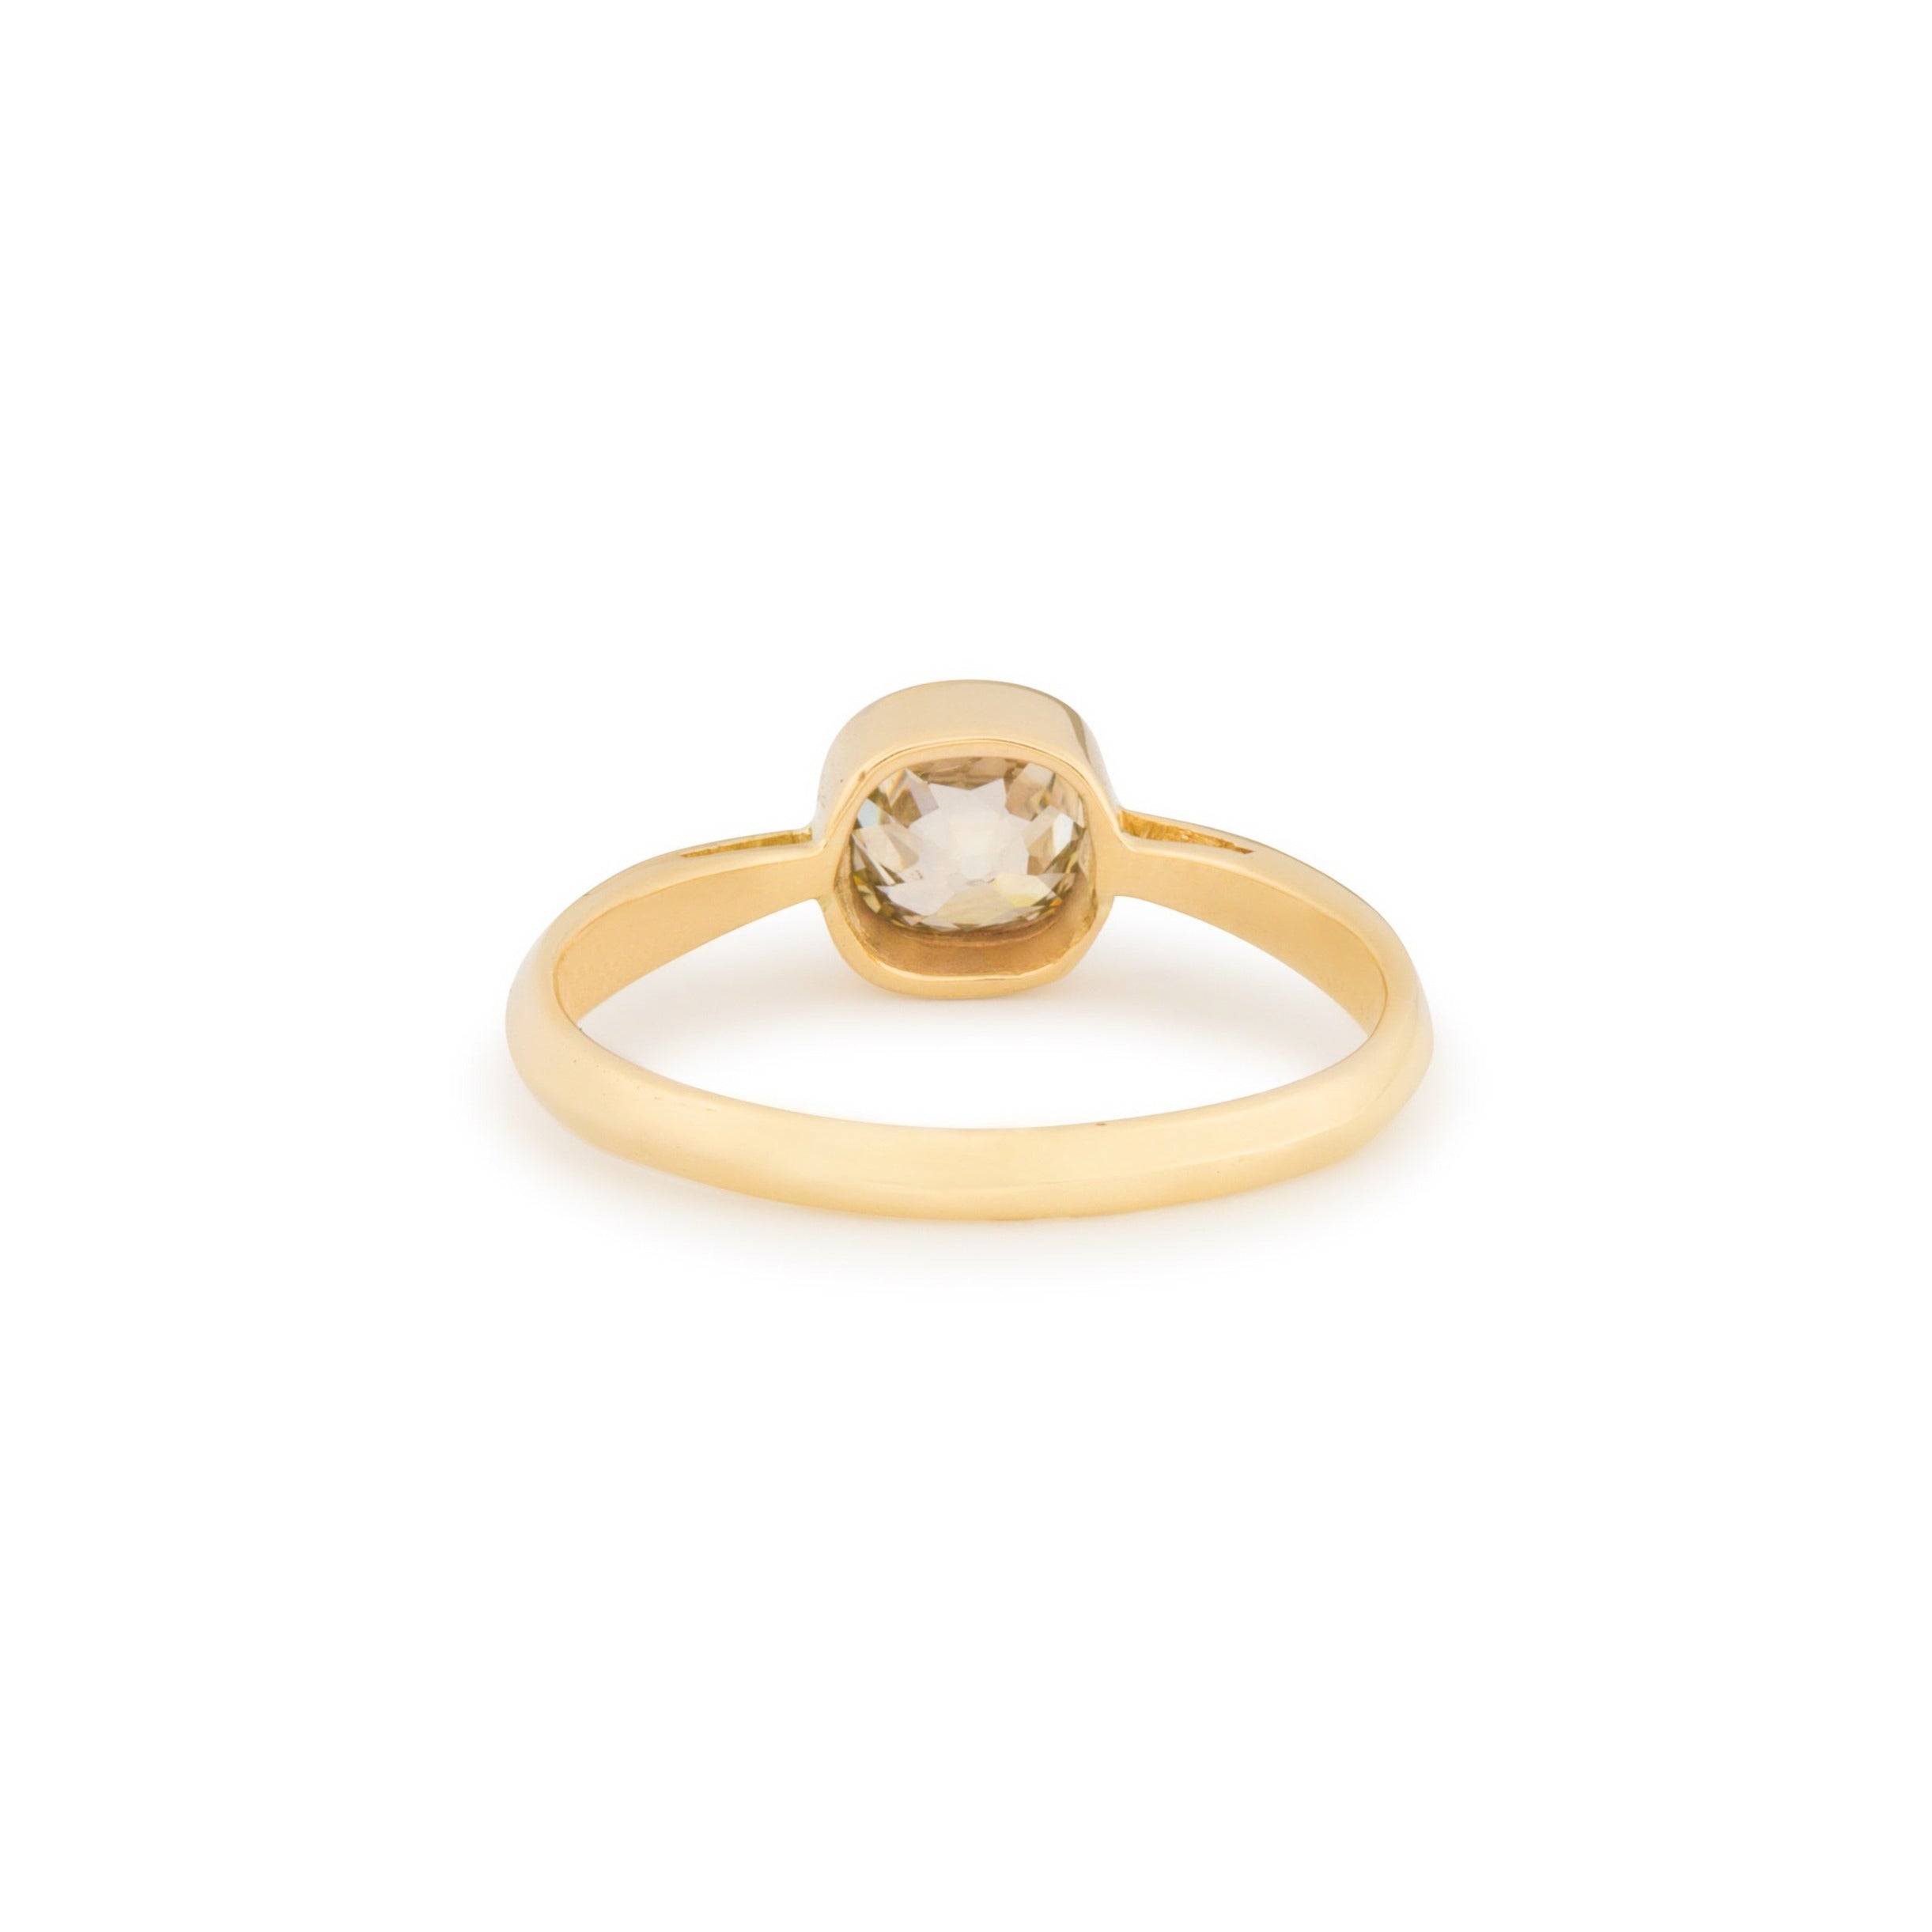 Old Mine Cut Diamond Solitaire and 14k Gold Ring